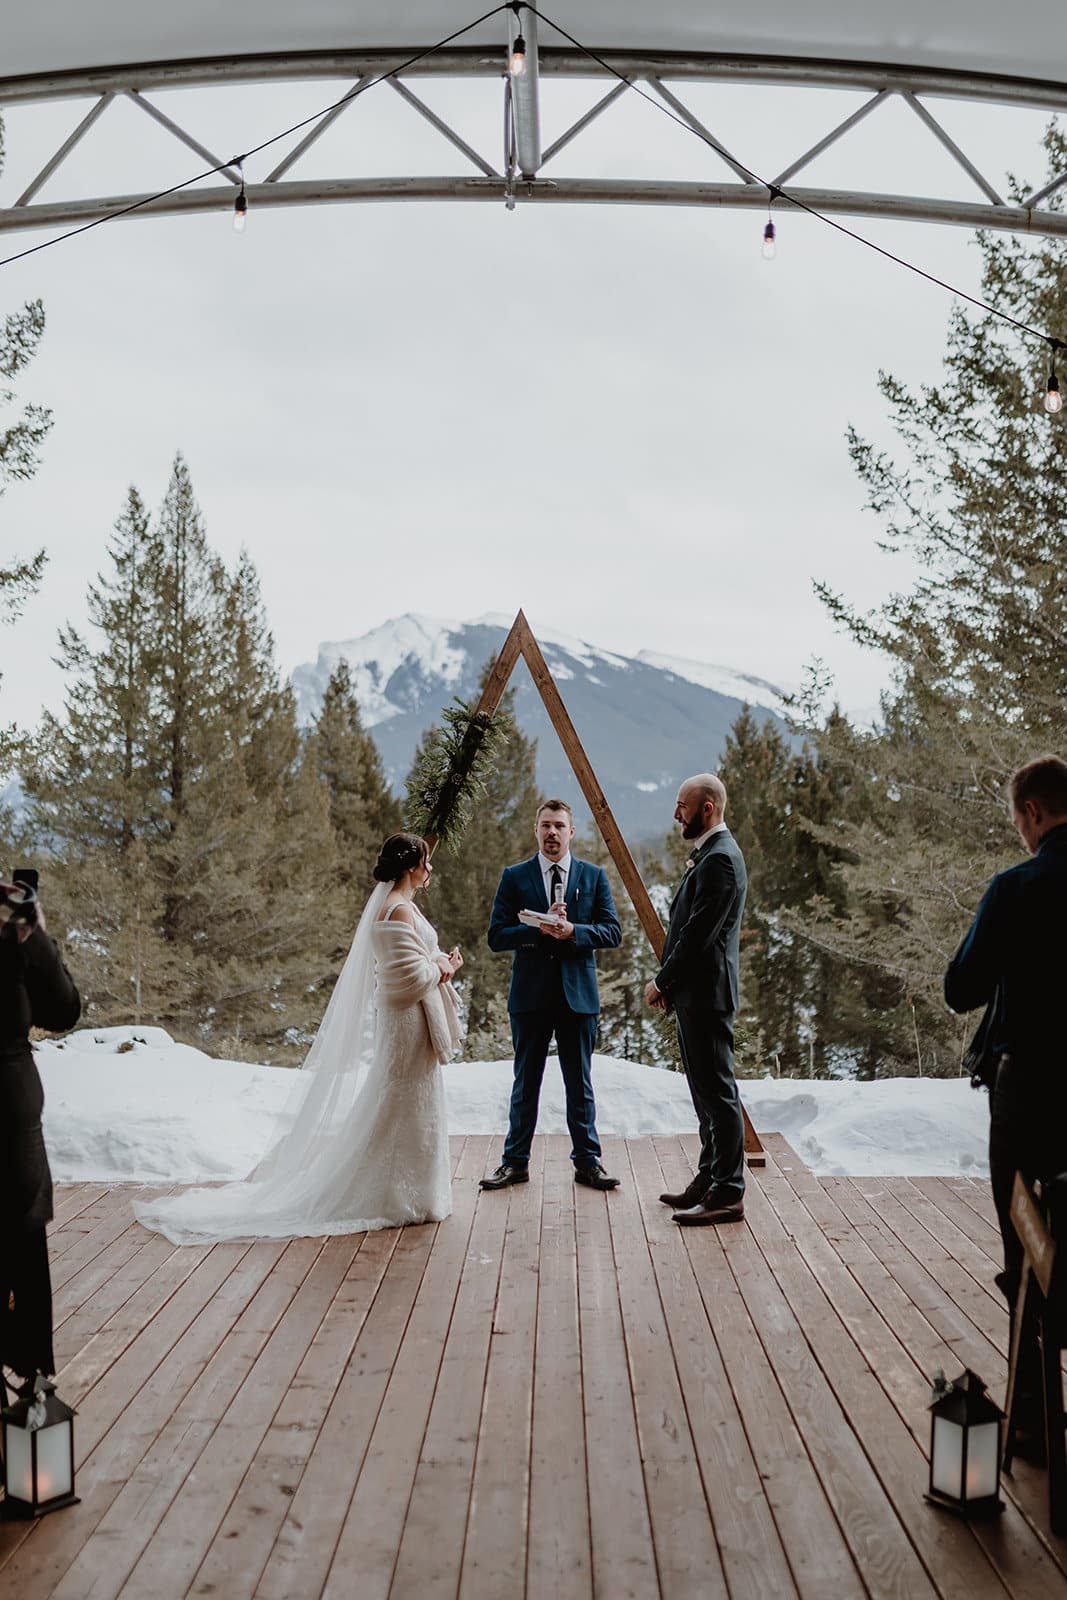 WEDDING CEREMONY AT STEWART CREEK GOLF IN CANMORE, AB